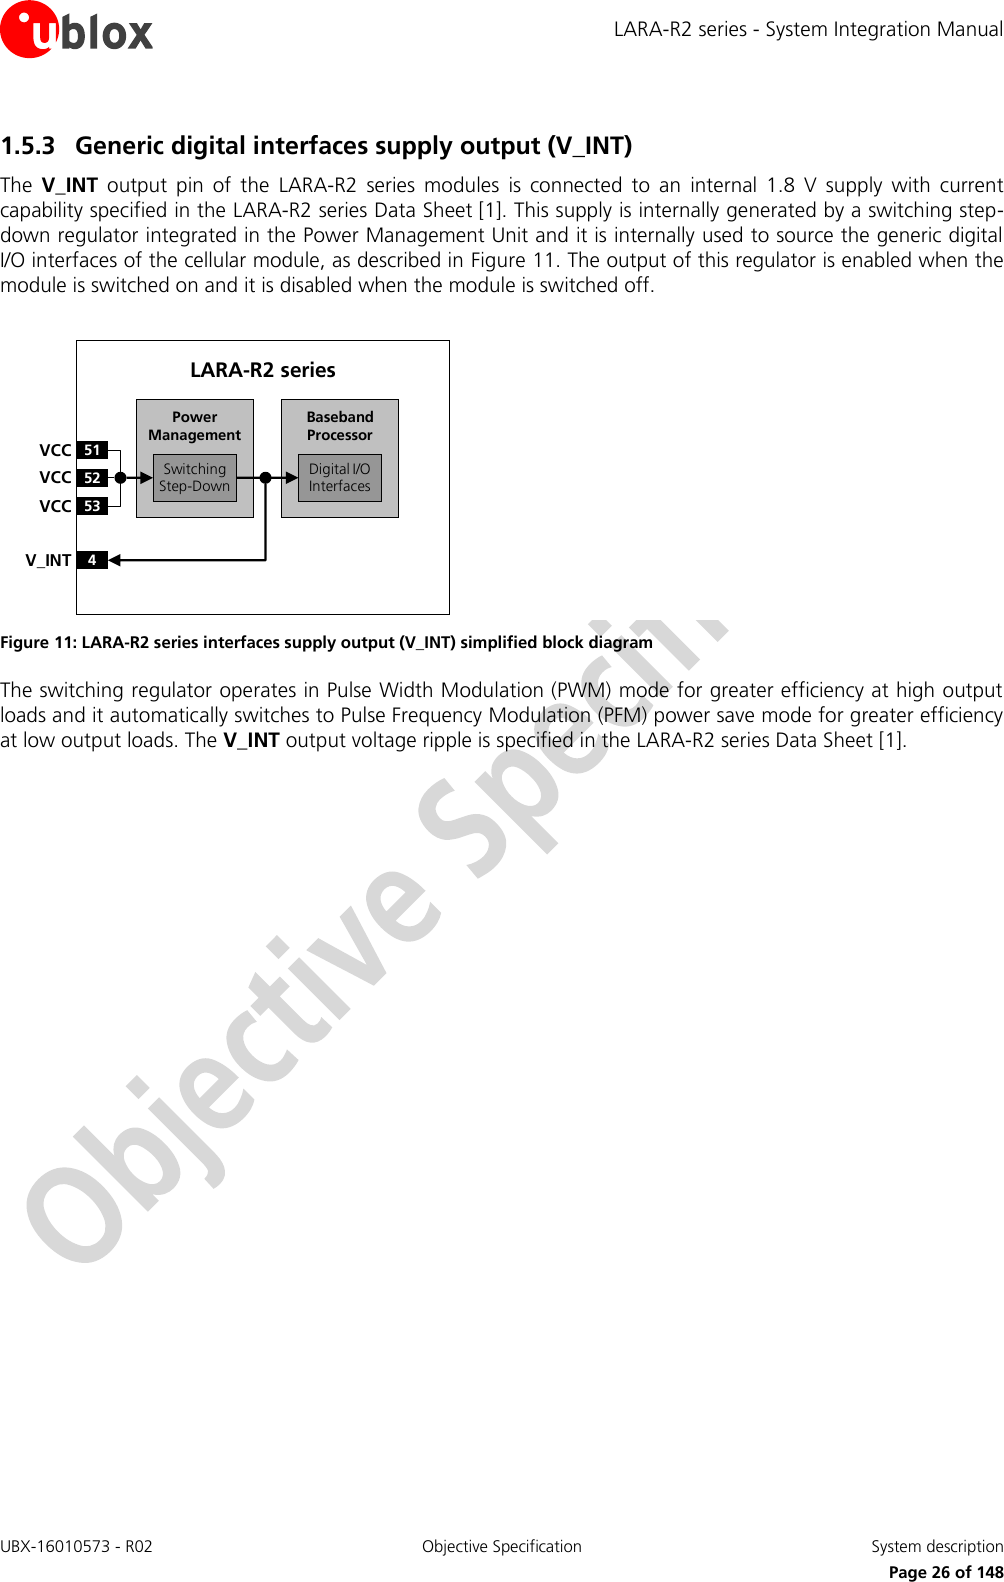 LARA-R2 series - System Integration Manual UBX-16010573 - R02  Objective Specification  System description     Page 26 of 148 1.5.3 Generic digital interfaces supply output (V_INT) The  V_INT  output  pin  of  the  LARA-R2  series  modules  is  connected  to  an  internal  1.8  V  supply  with  current capability specified in the LARA-R2 series Data Sheet [1]. This supply is internally generated by a switching step-down regulator integrated in the Power Management Unit and it is internally used to source the generic digital I/O interfaces of the cellular module, as described in Figure 11. The output of this regulator is enabled when the module is switched on and it is disabled when the module is switched off.  Baseband Processor51VCC52VCC53VCC4V_INTSwitchingStep-DownDigital I/O InterfacesPower ManagementLARA-R2 series Figure 11: LARA-R2 series interfaces supply output (V_INT) simplified block diagram The switching regulator operates in Pulse Width Modulation (PWM) mode for greater efficiency at high output loads and it automatically switches to Pulse Frequency Modulation (PFM) power save mode for greater efficiency at low output loads. The V_INT output voltage ripple is specified in the LARA-R2 series Data Sheet [1].  